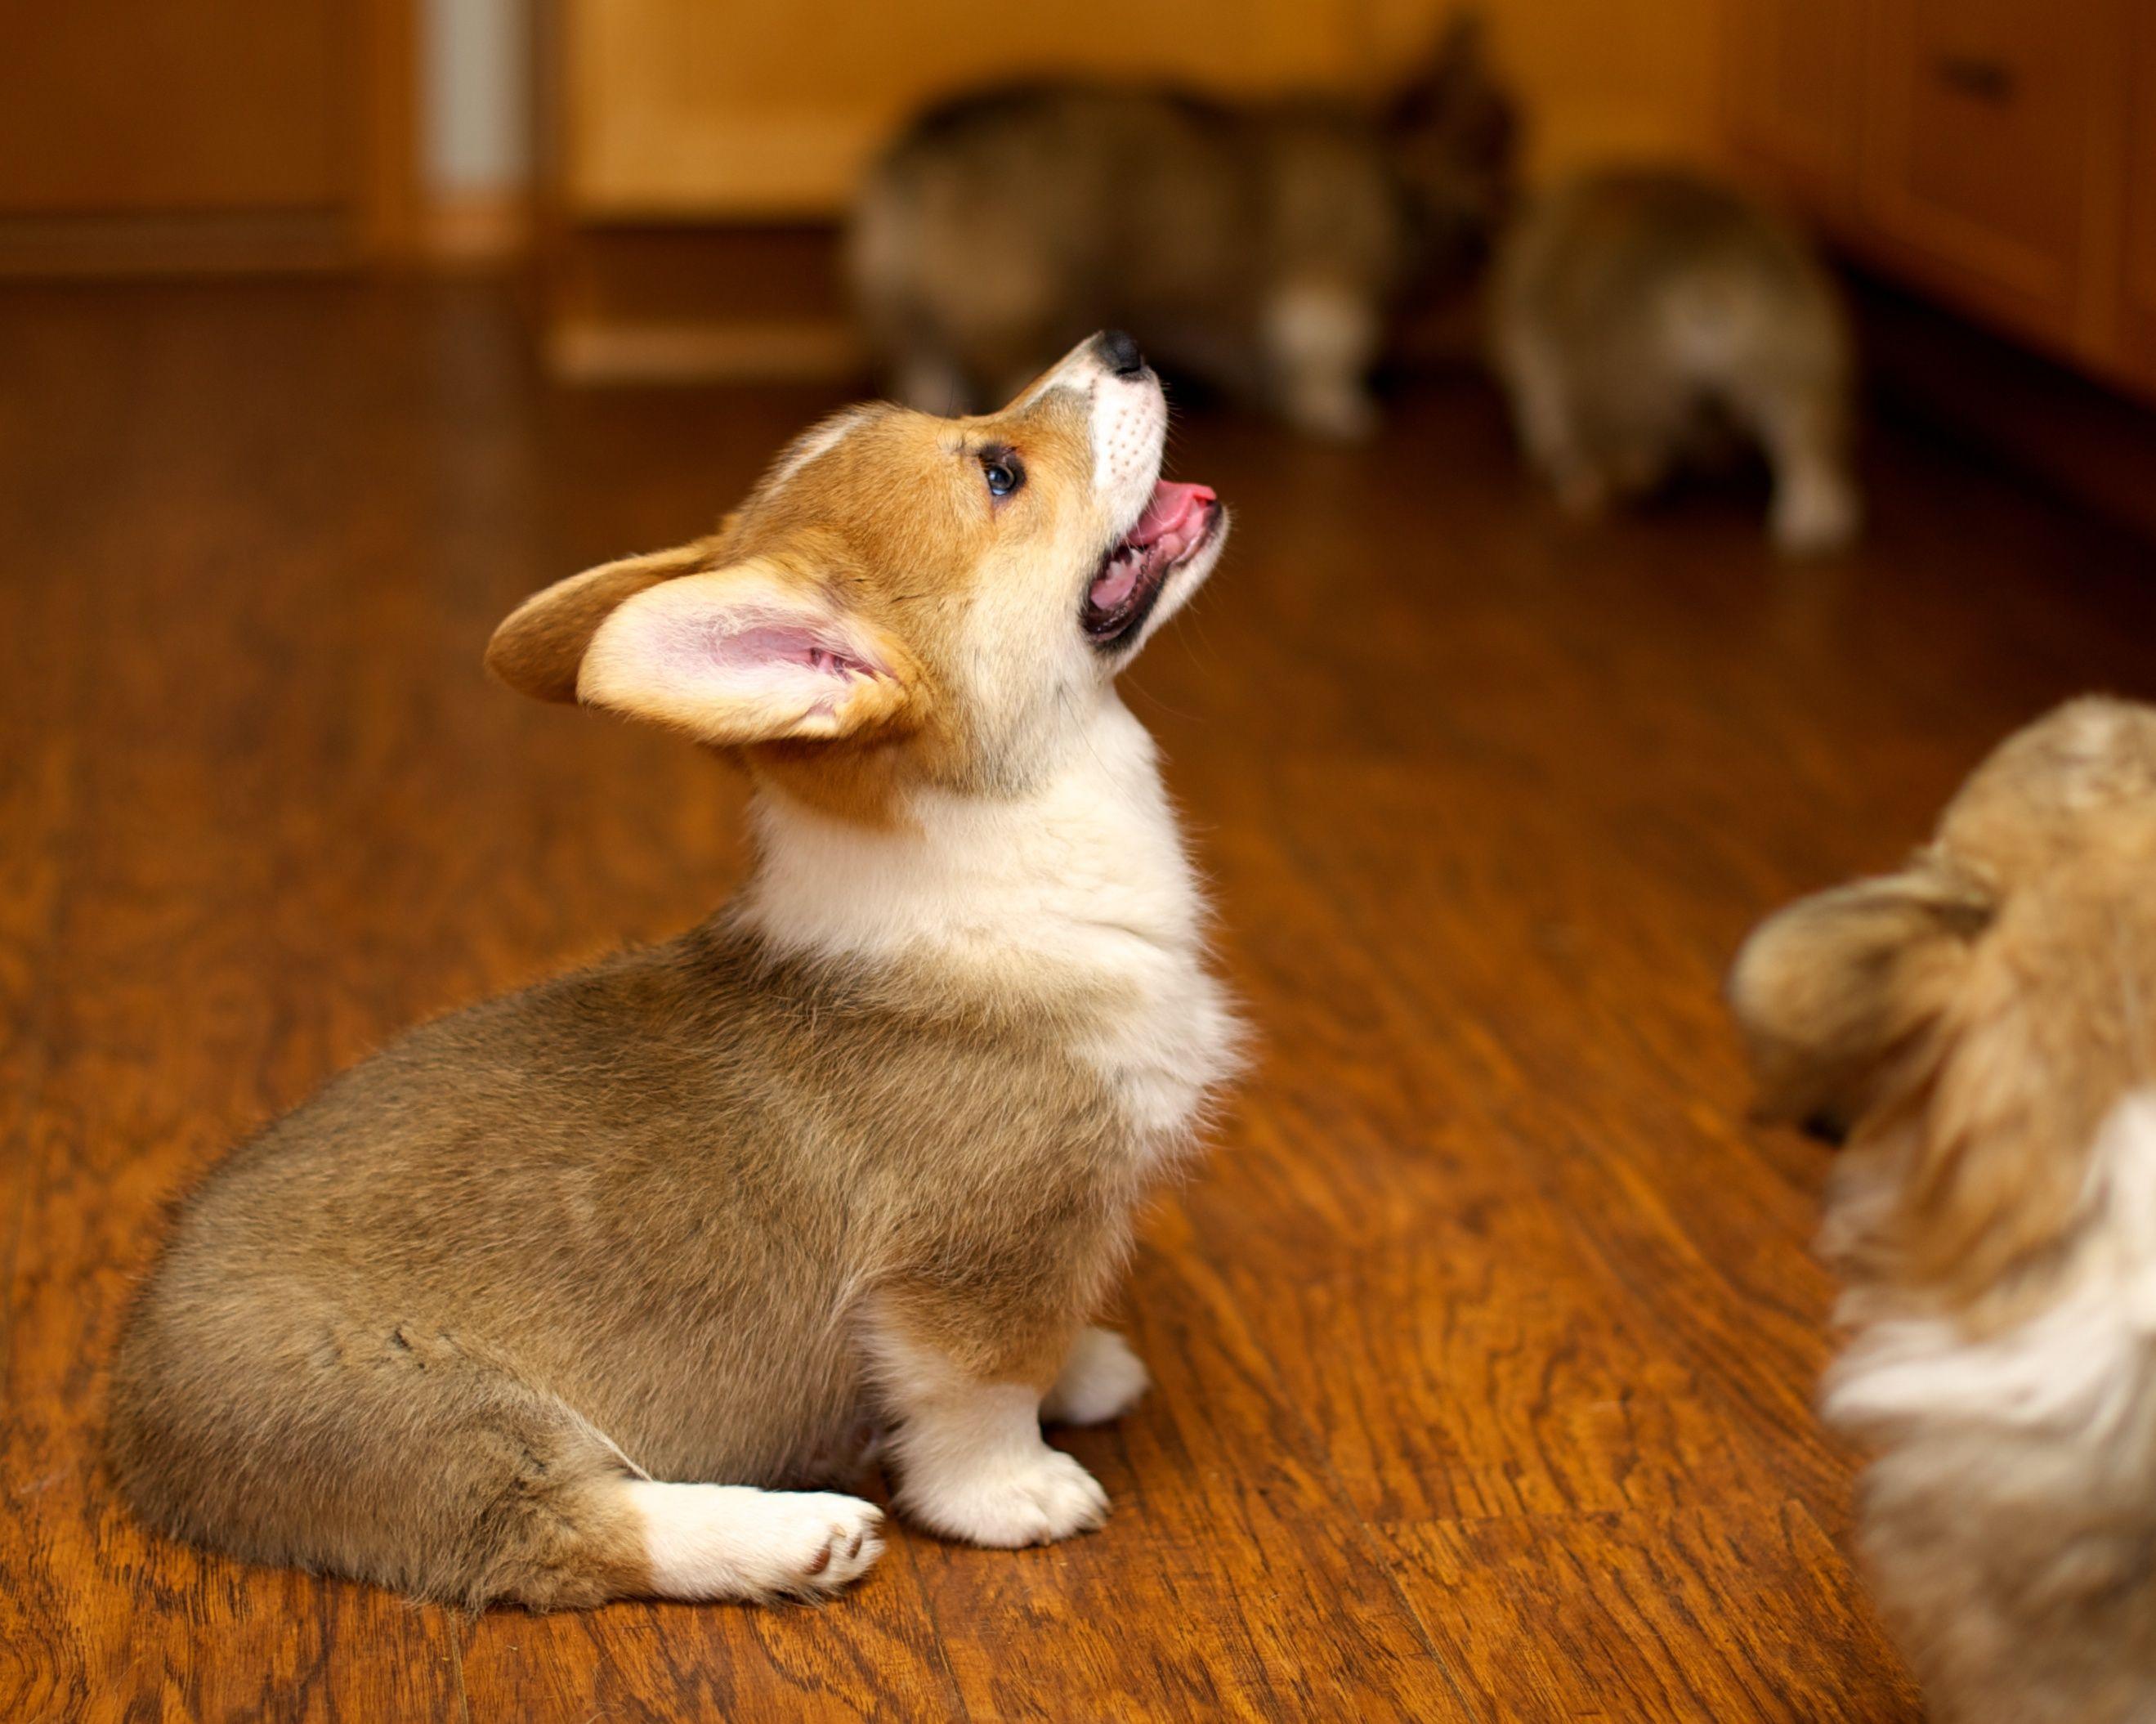 Puppy velsh Corgi looking up wallpaper and image